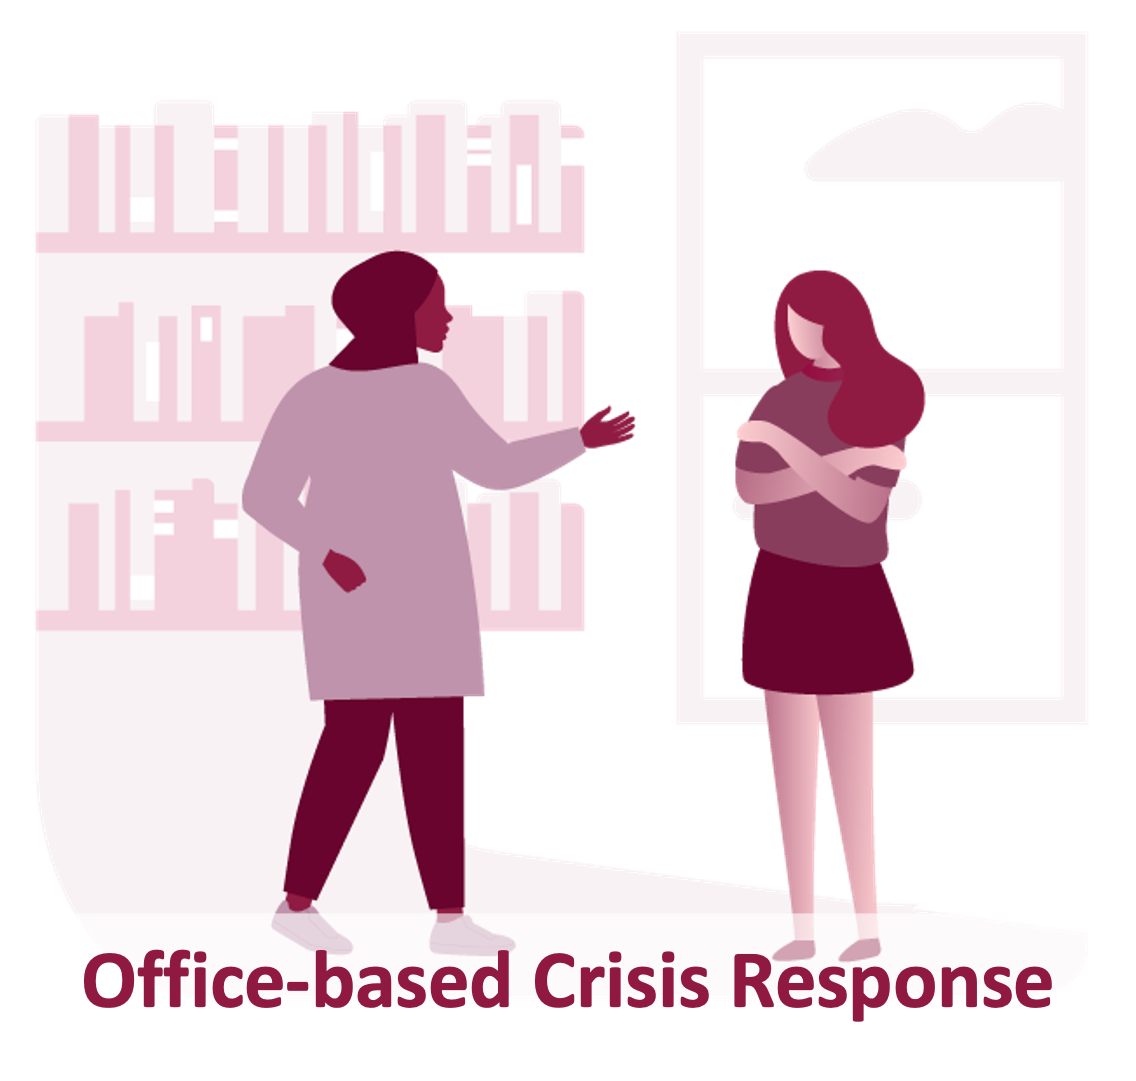  illustration showing a clinician giving mental health crisis services in an office